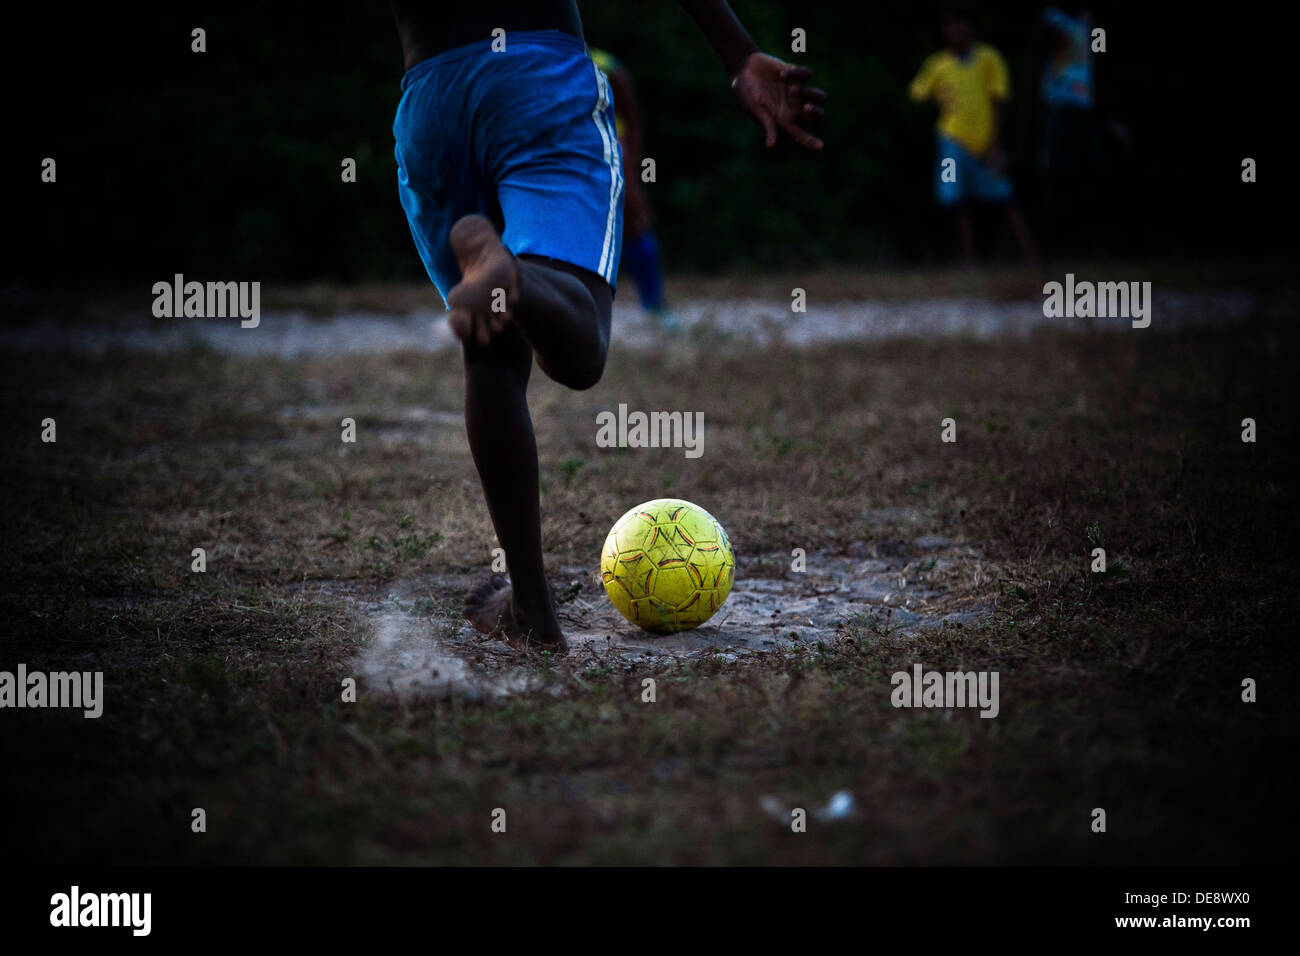 Countryside Brazil soccer. In Brazil black boys with remarkable talent for football usually have the nickname of Pelé. Stock Photo